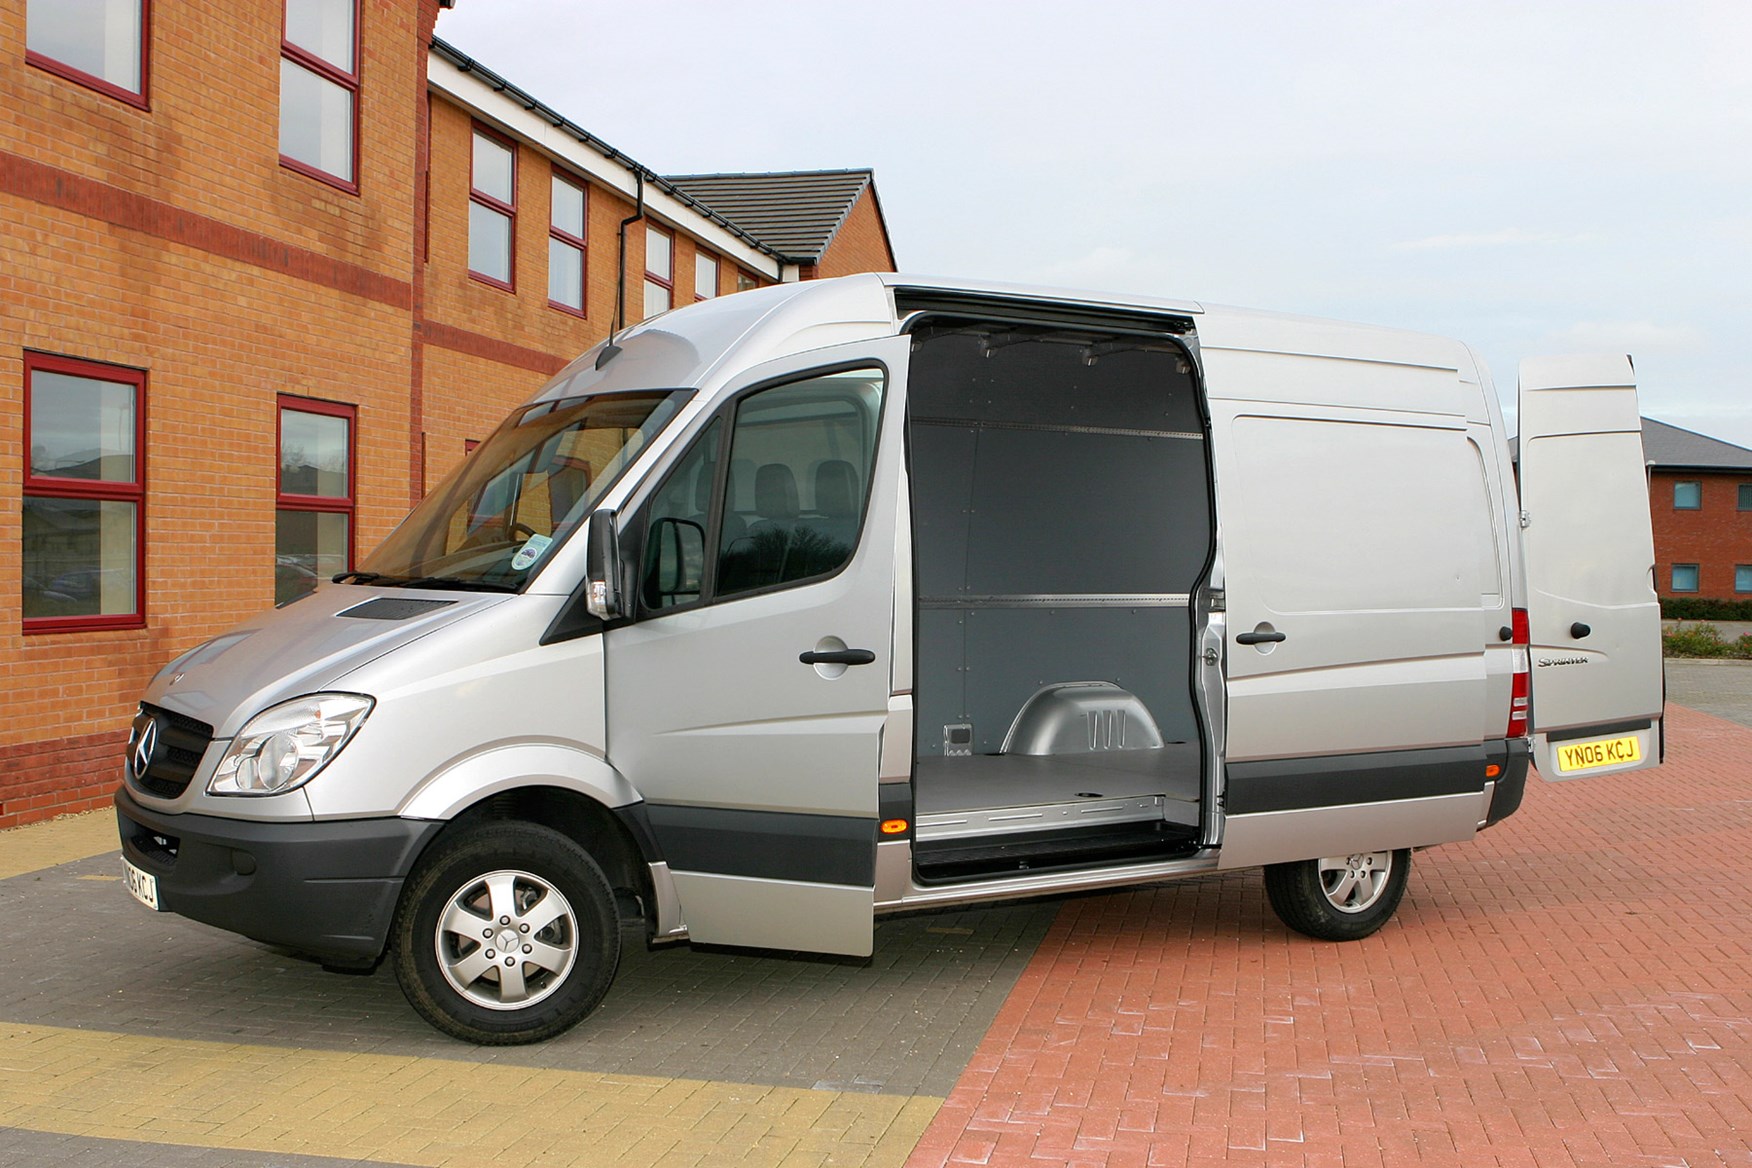 Mercedes-Benz Sprinter 2006-2013 review on Parkers Vans - load area access